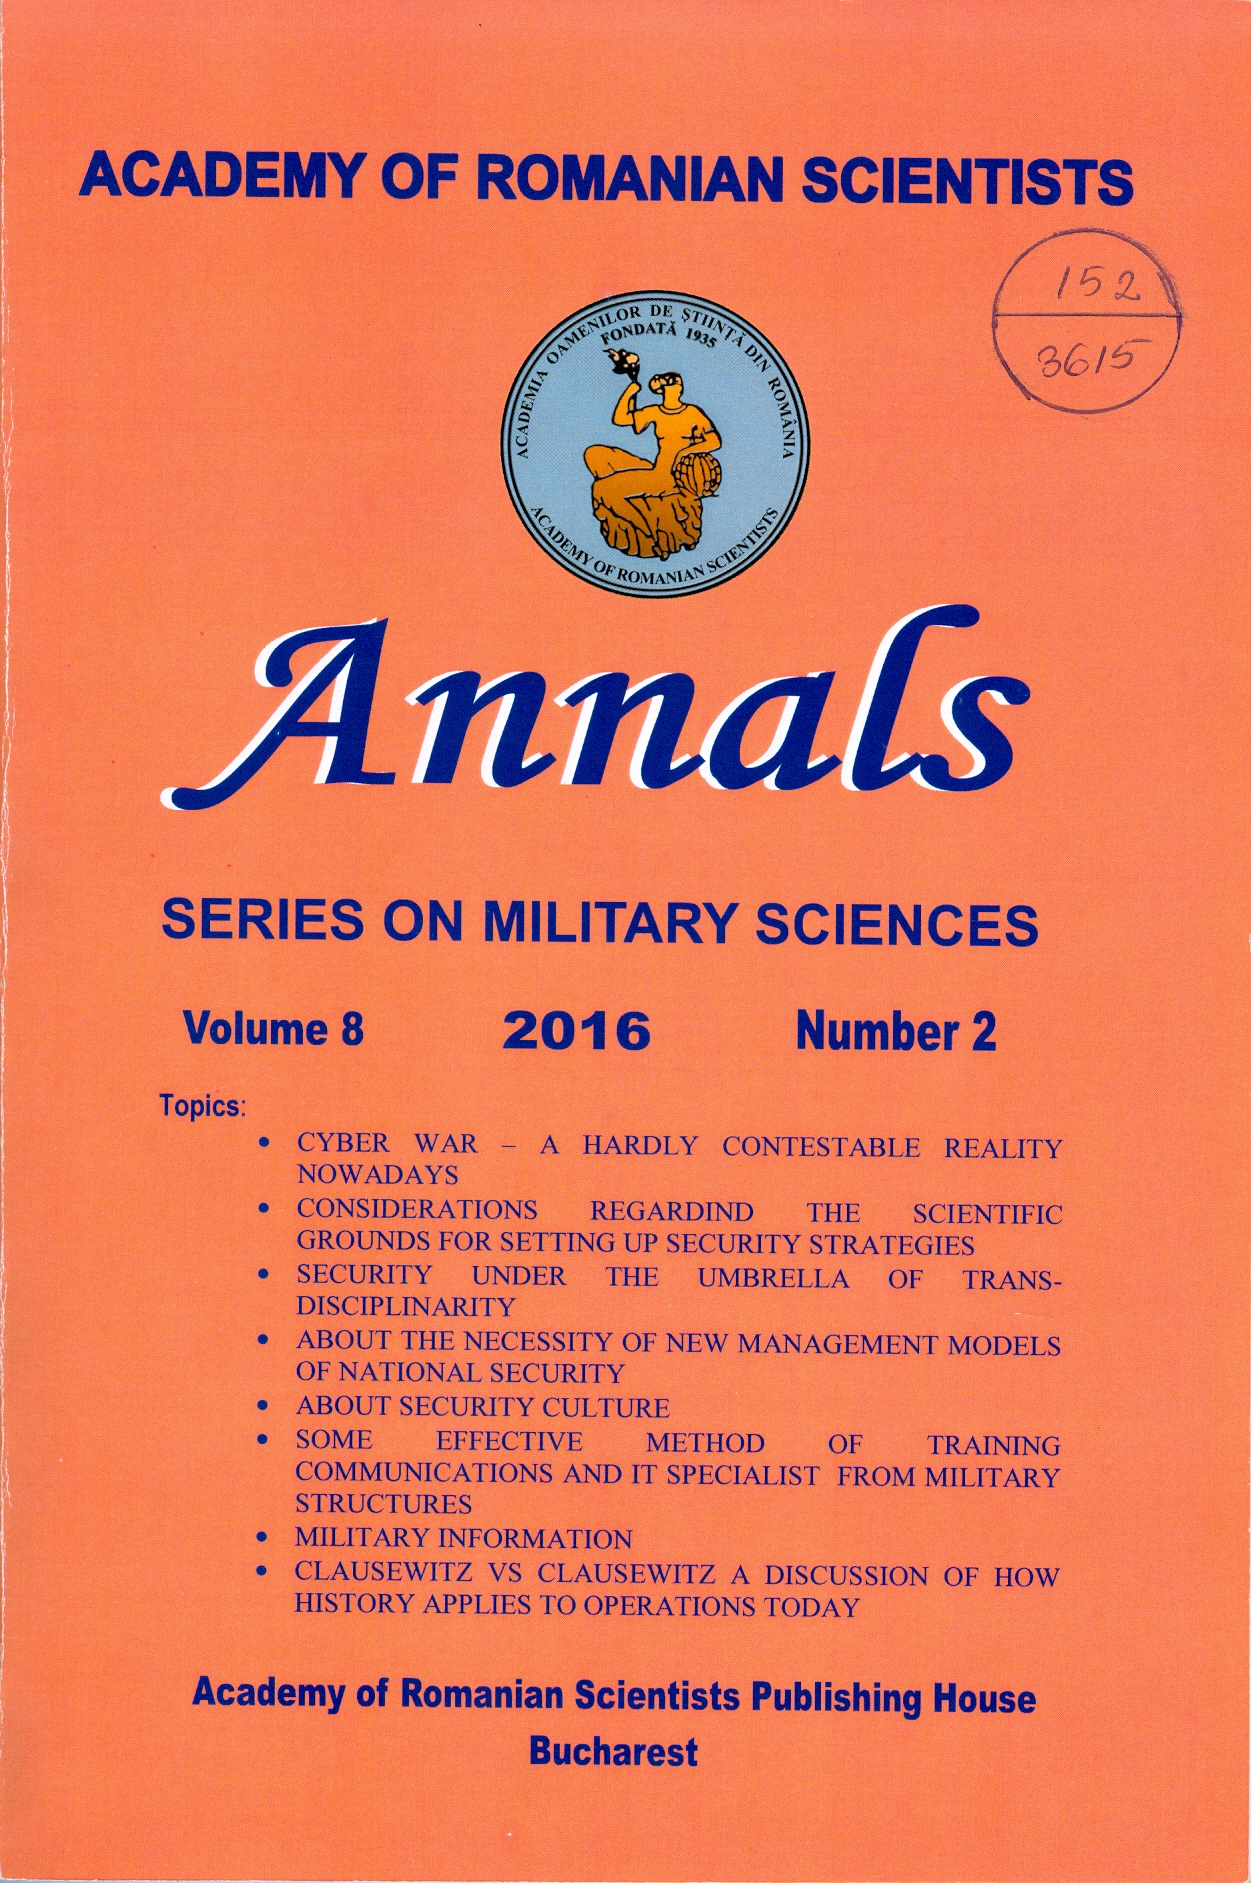 MILITARY INFORMATION Cover Image